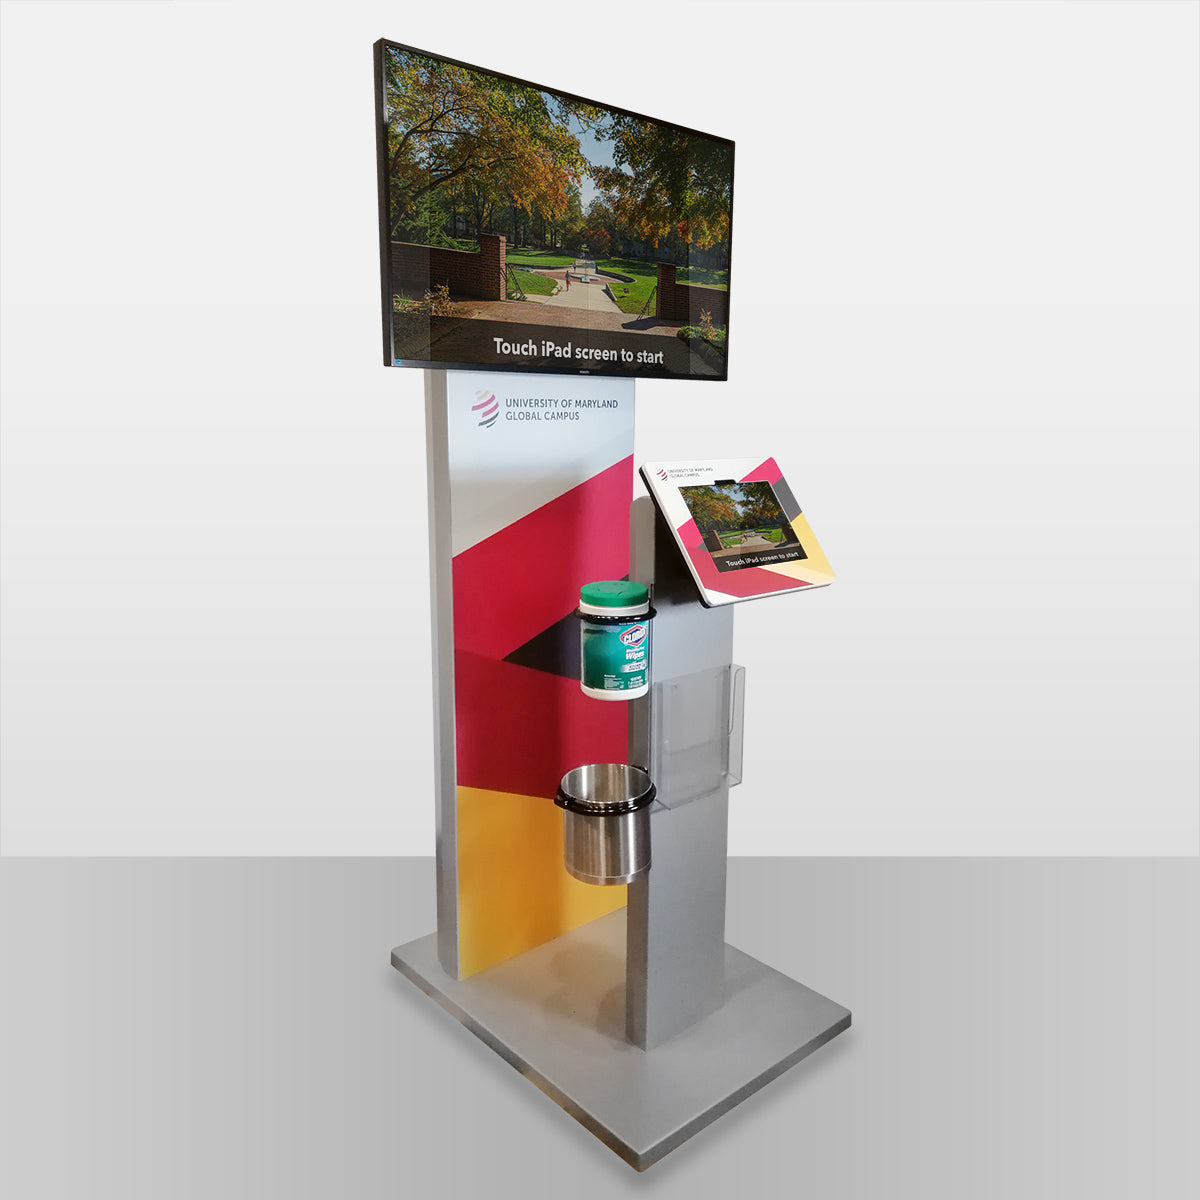 A freestanding tablet kiosk with an external monitor attachment. The tablet screen is mirrored to the external screen for high visibility.